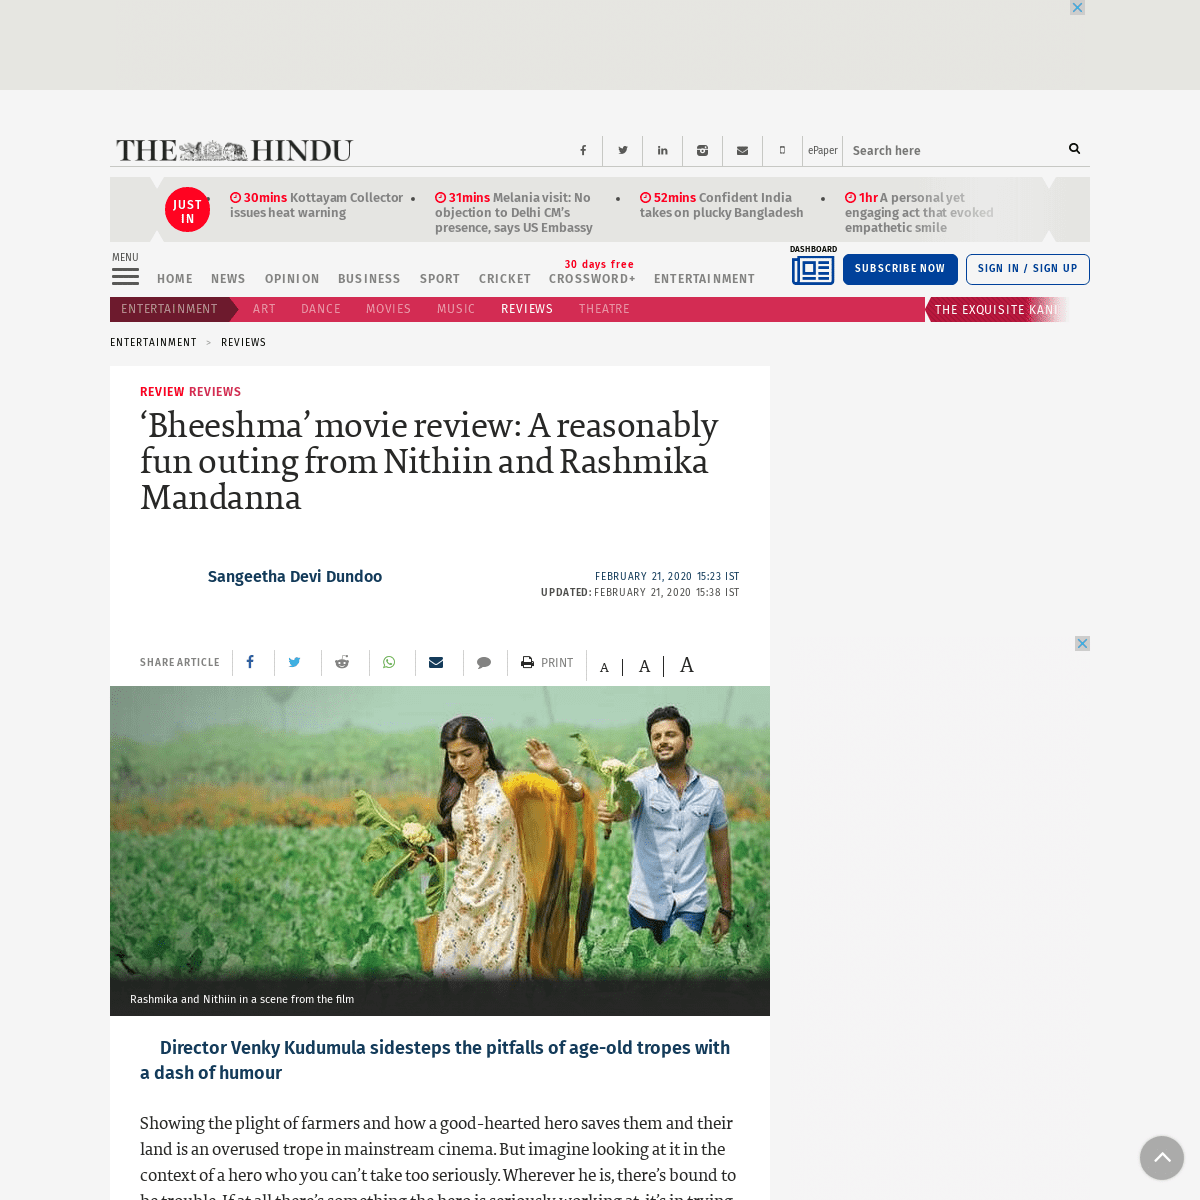 A complete backup of www.thehindu.com/entertainment/reviews/bheeshma-review-this-nithiin-rashmika-starrer-directed-by-venky-kudu